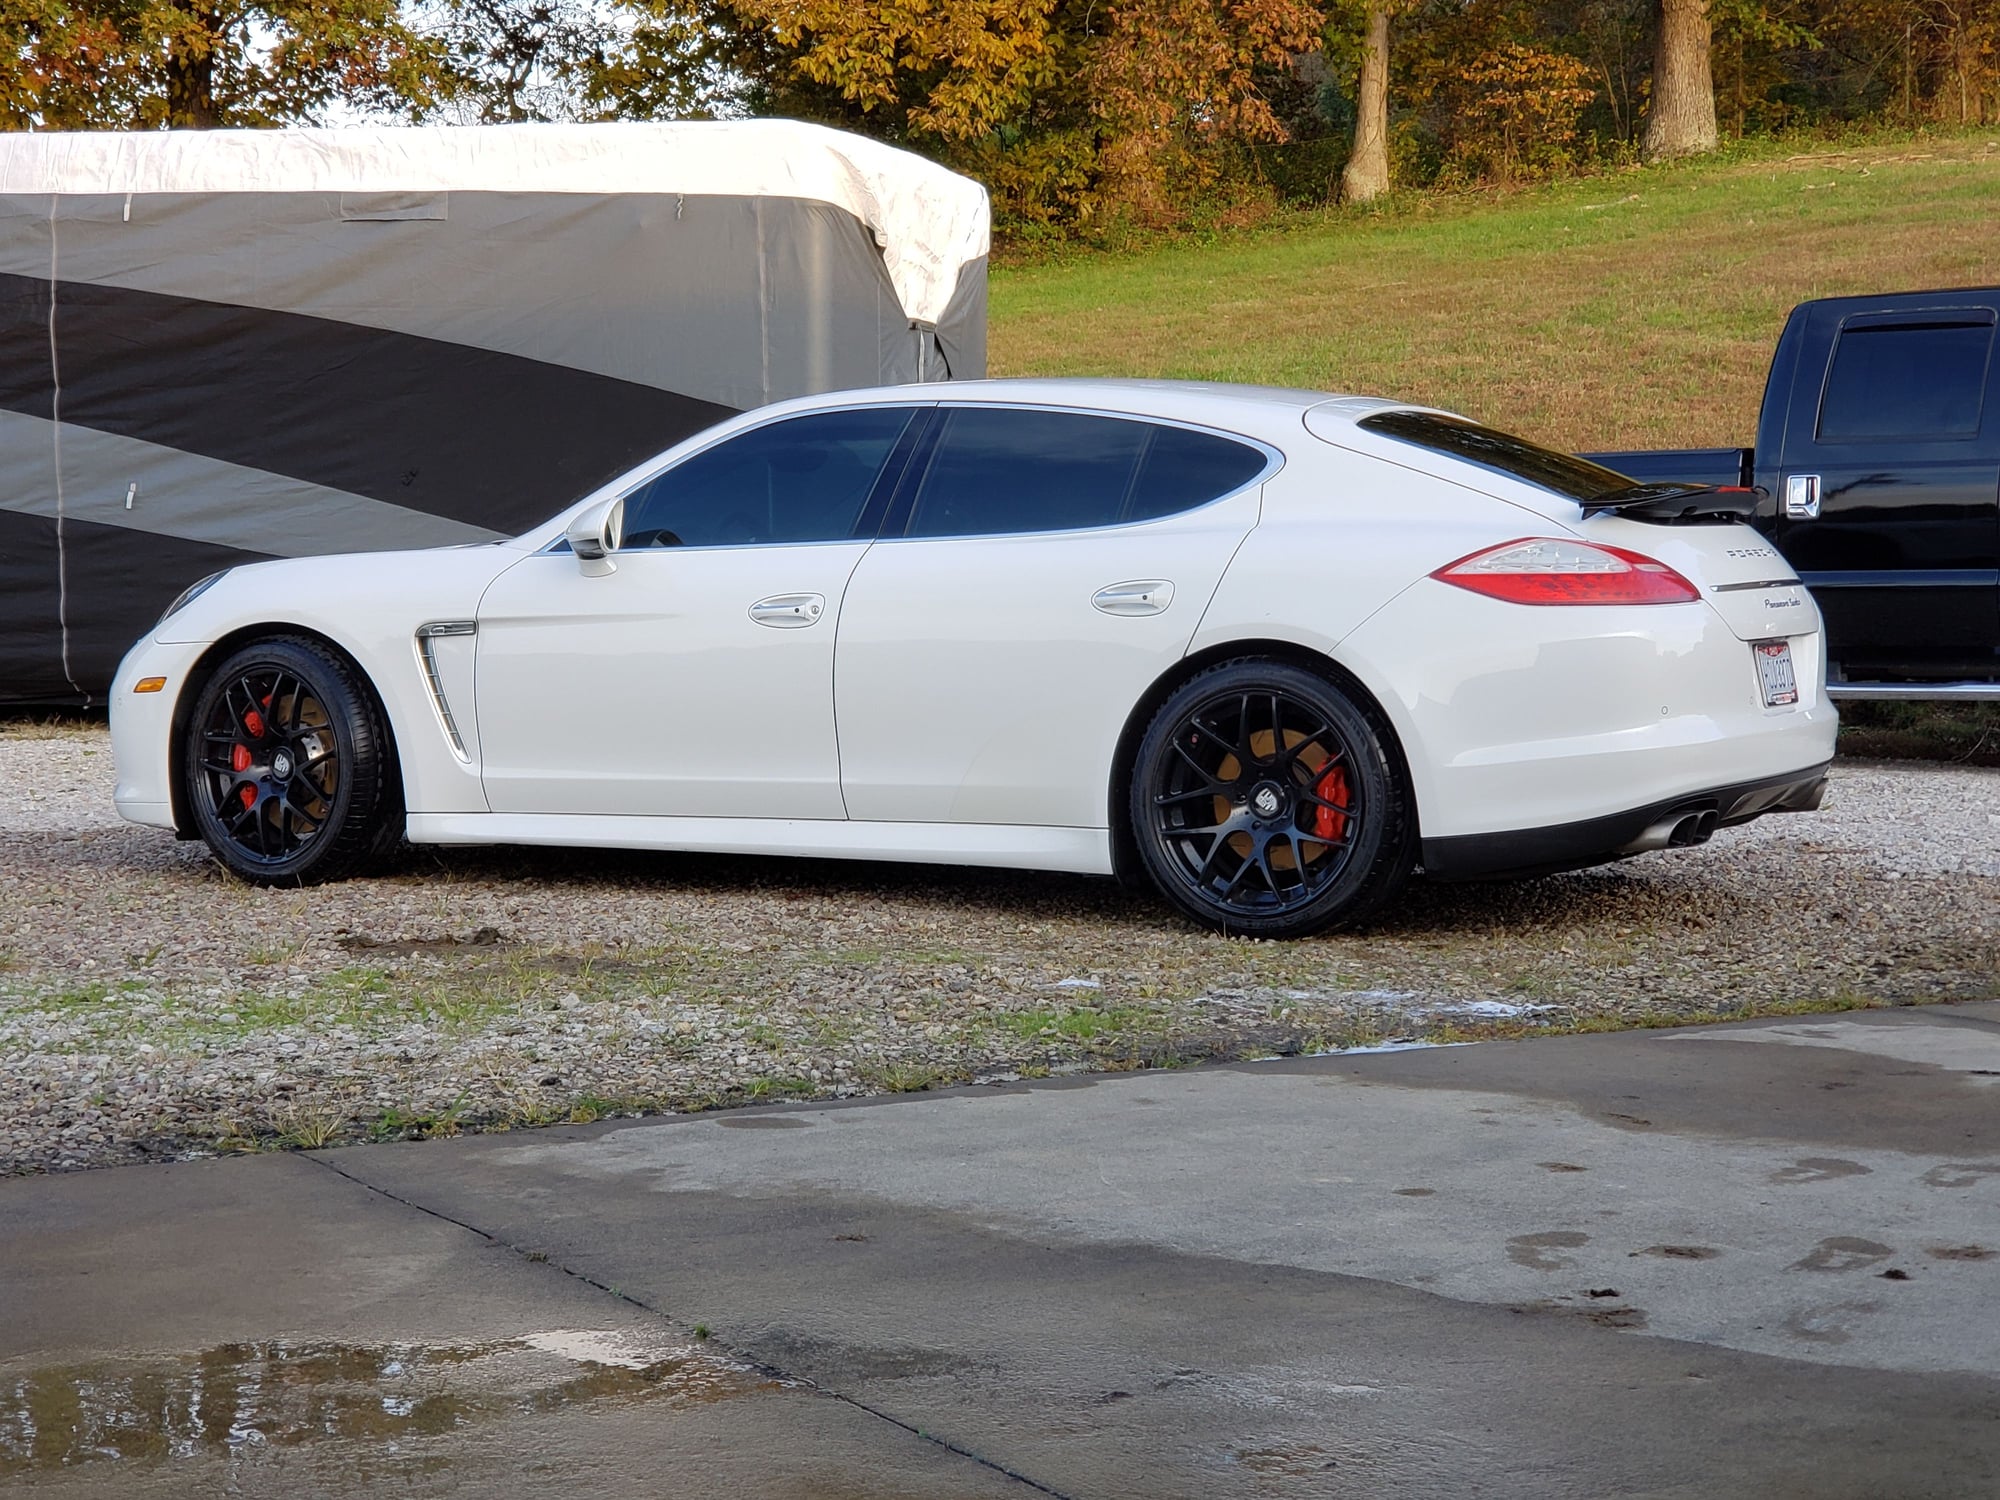 Wheels and Tires/Axles - 2011 Panamera Turbo wheels 20 with 90% new tires - Used - 2010 to 2014 Porsche Panamera - Portsmouth, OH 45662, United States